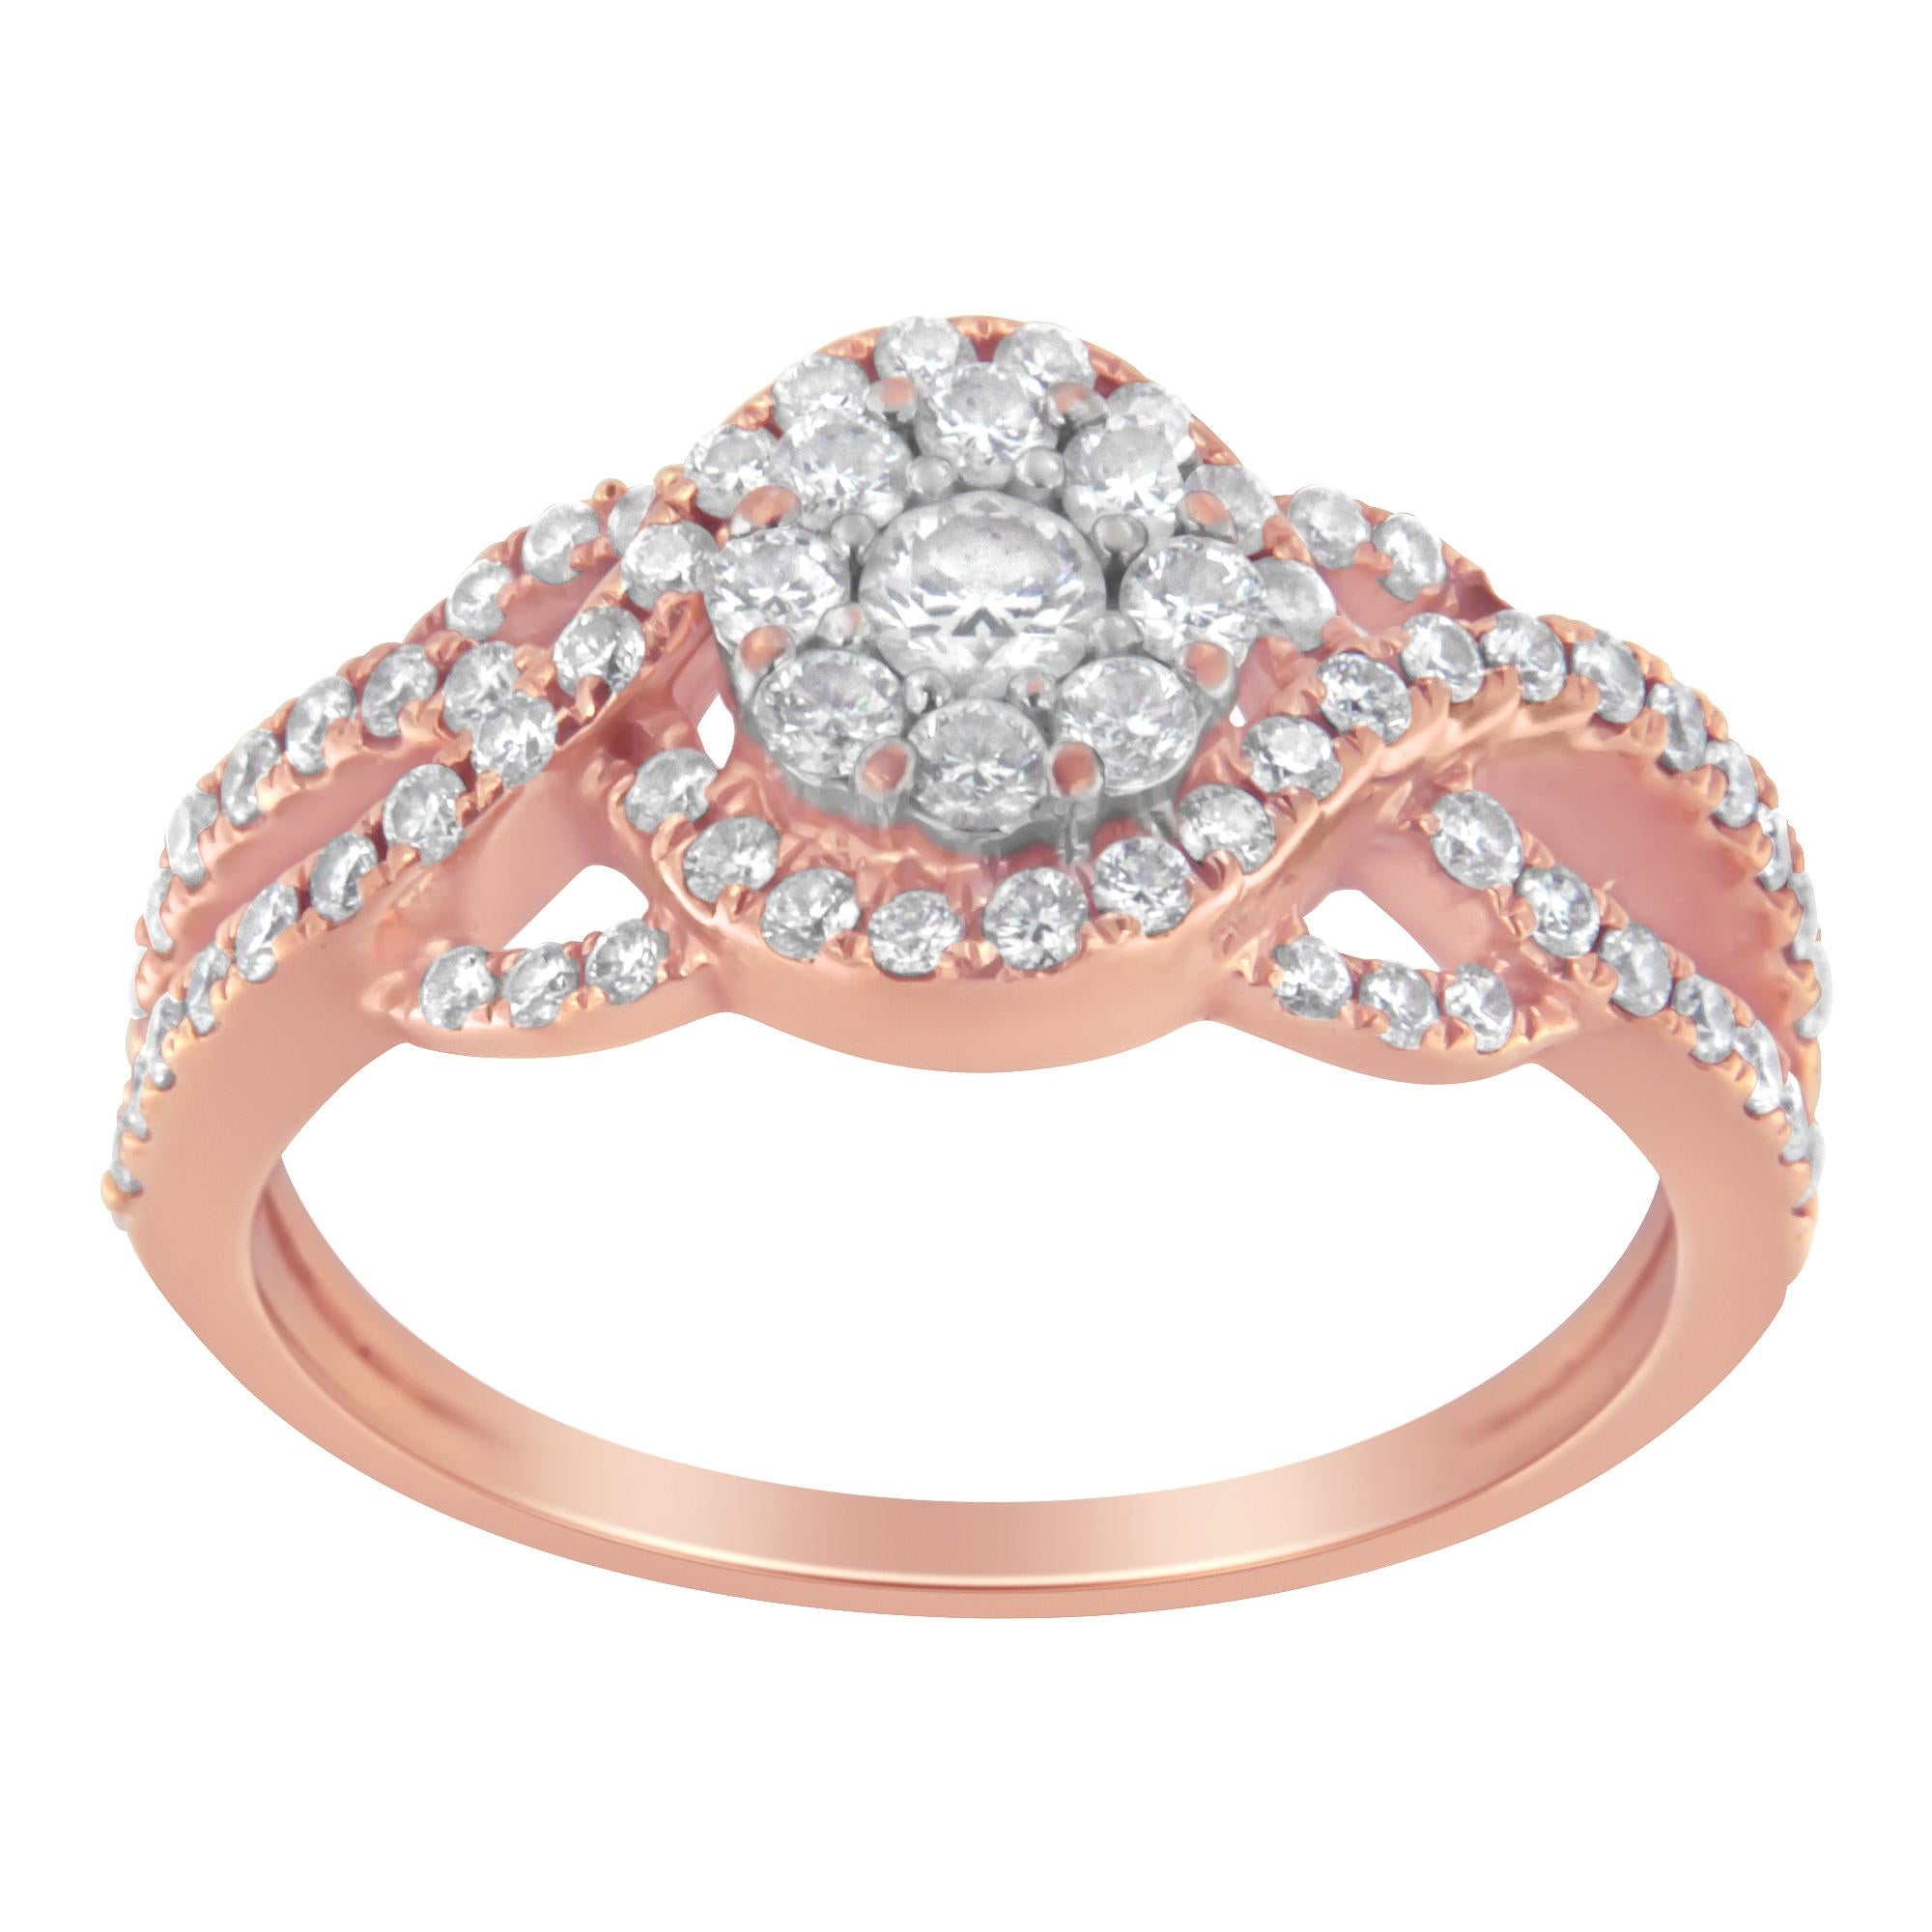 Dazzling cocktail ring that displays a sophisticated and elegant design. It features a 10k rose gold structure that embraces 69 round-cut genuine diamonds in a prong setting   . This results in a piece full of refinement and style. This rose gold